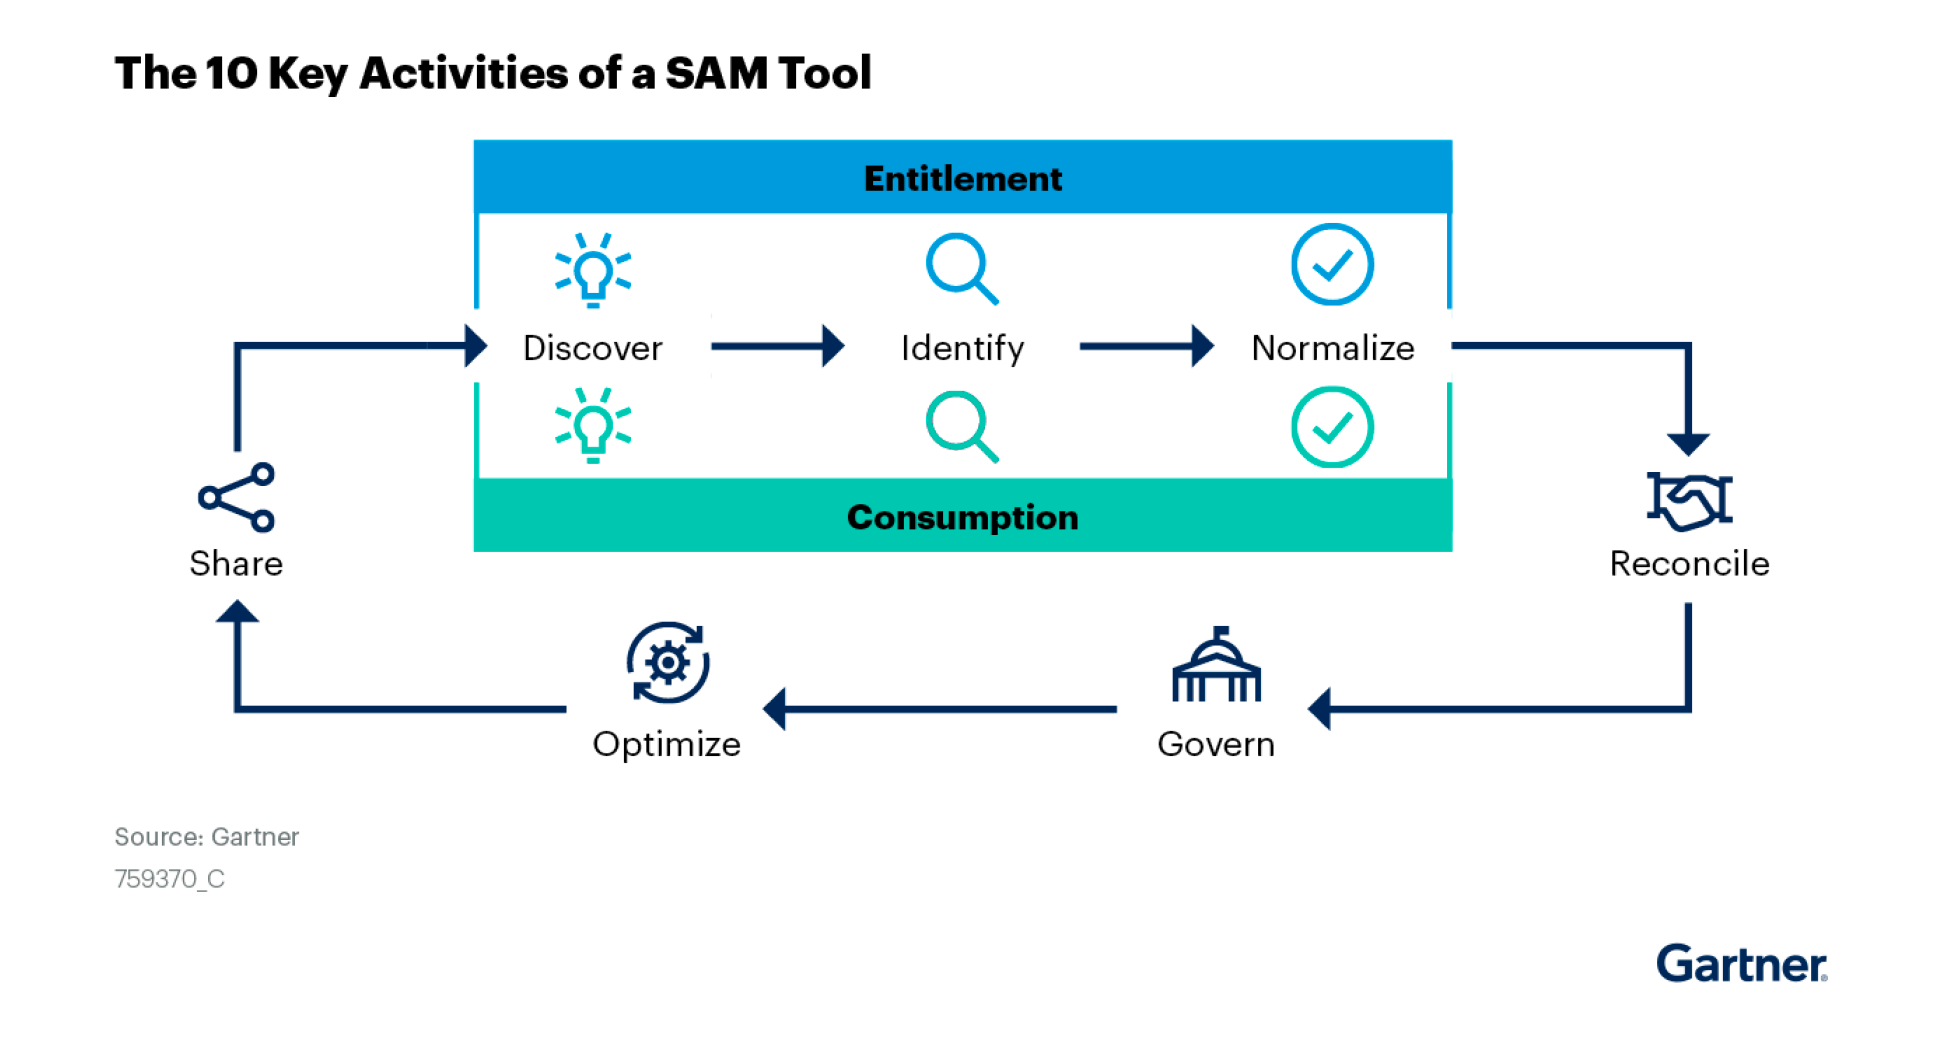 The 10 Key Activities of a SAM Tool